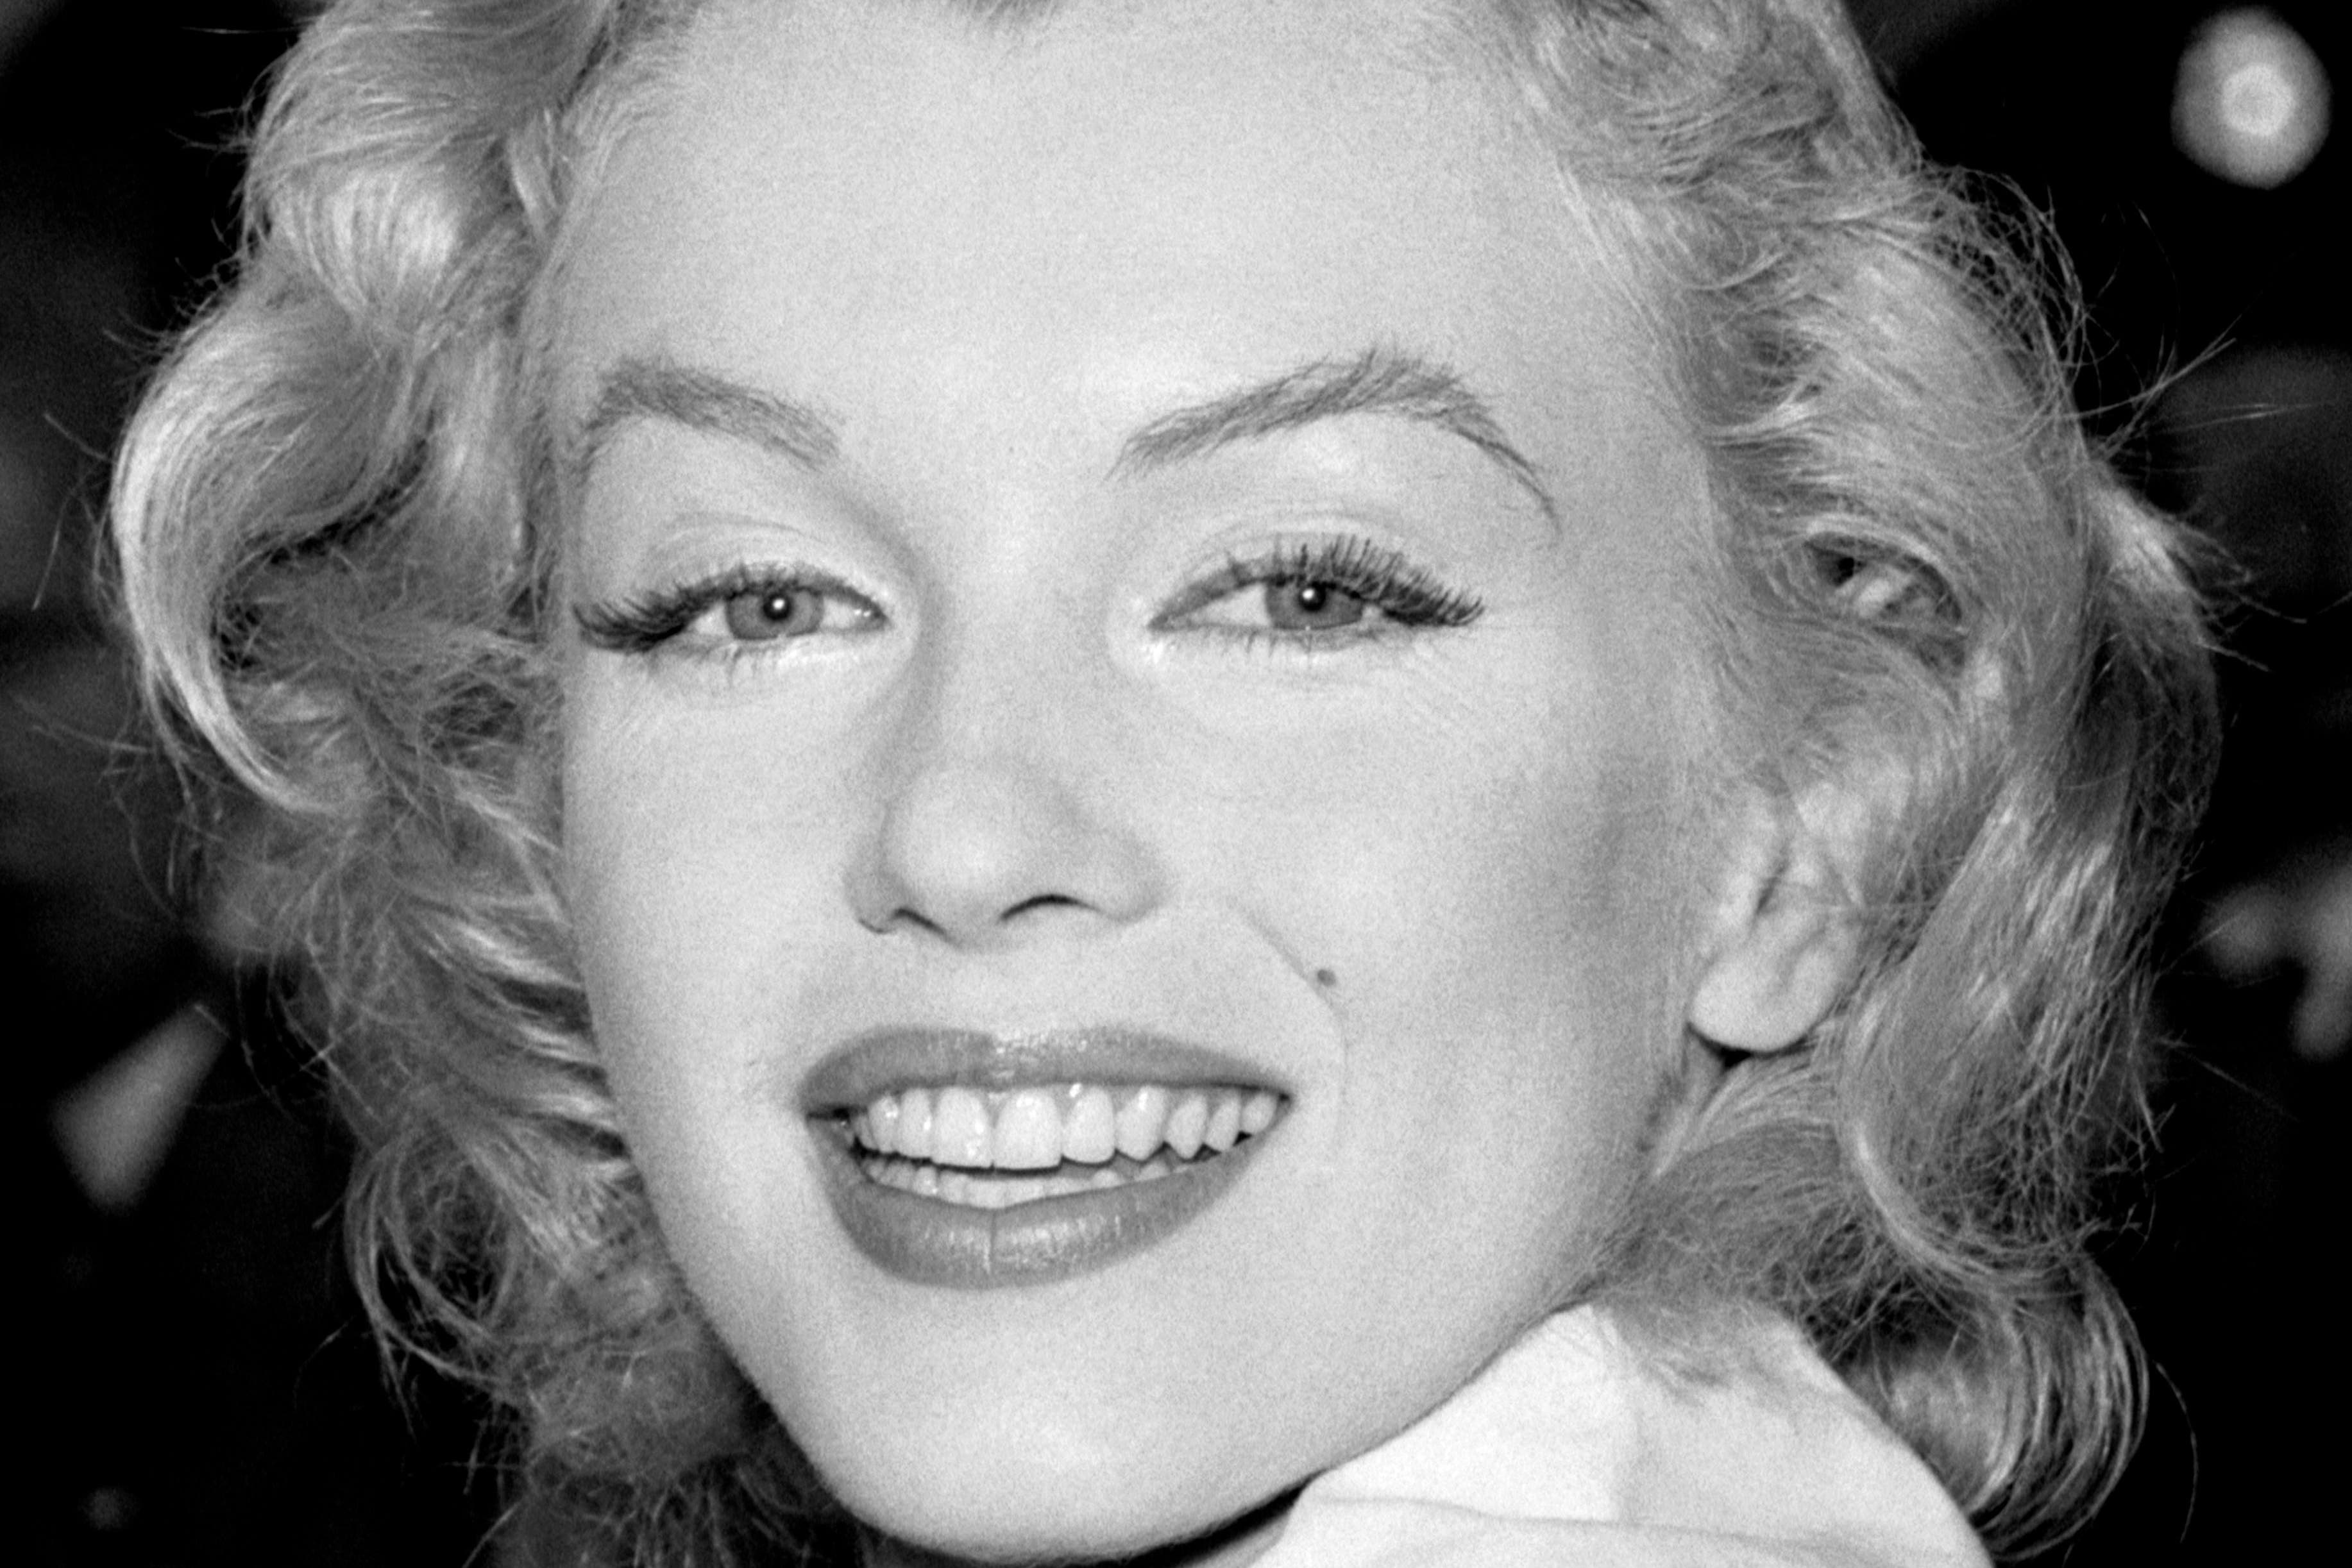 Marilyn Monroe Was “Never a Victim”: Seven Ways She Masterminded